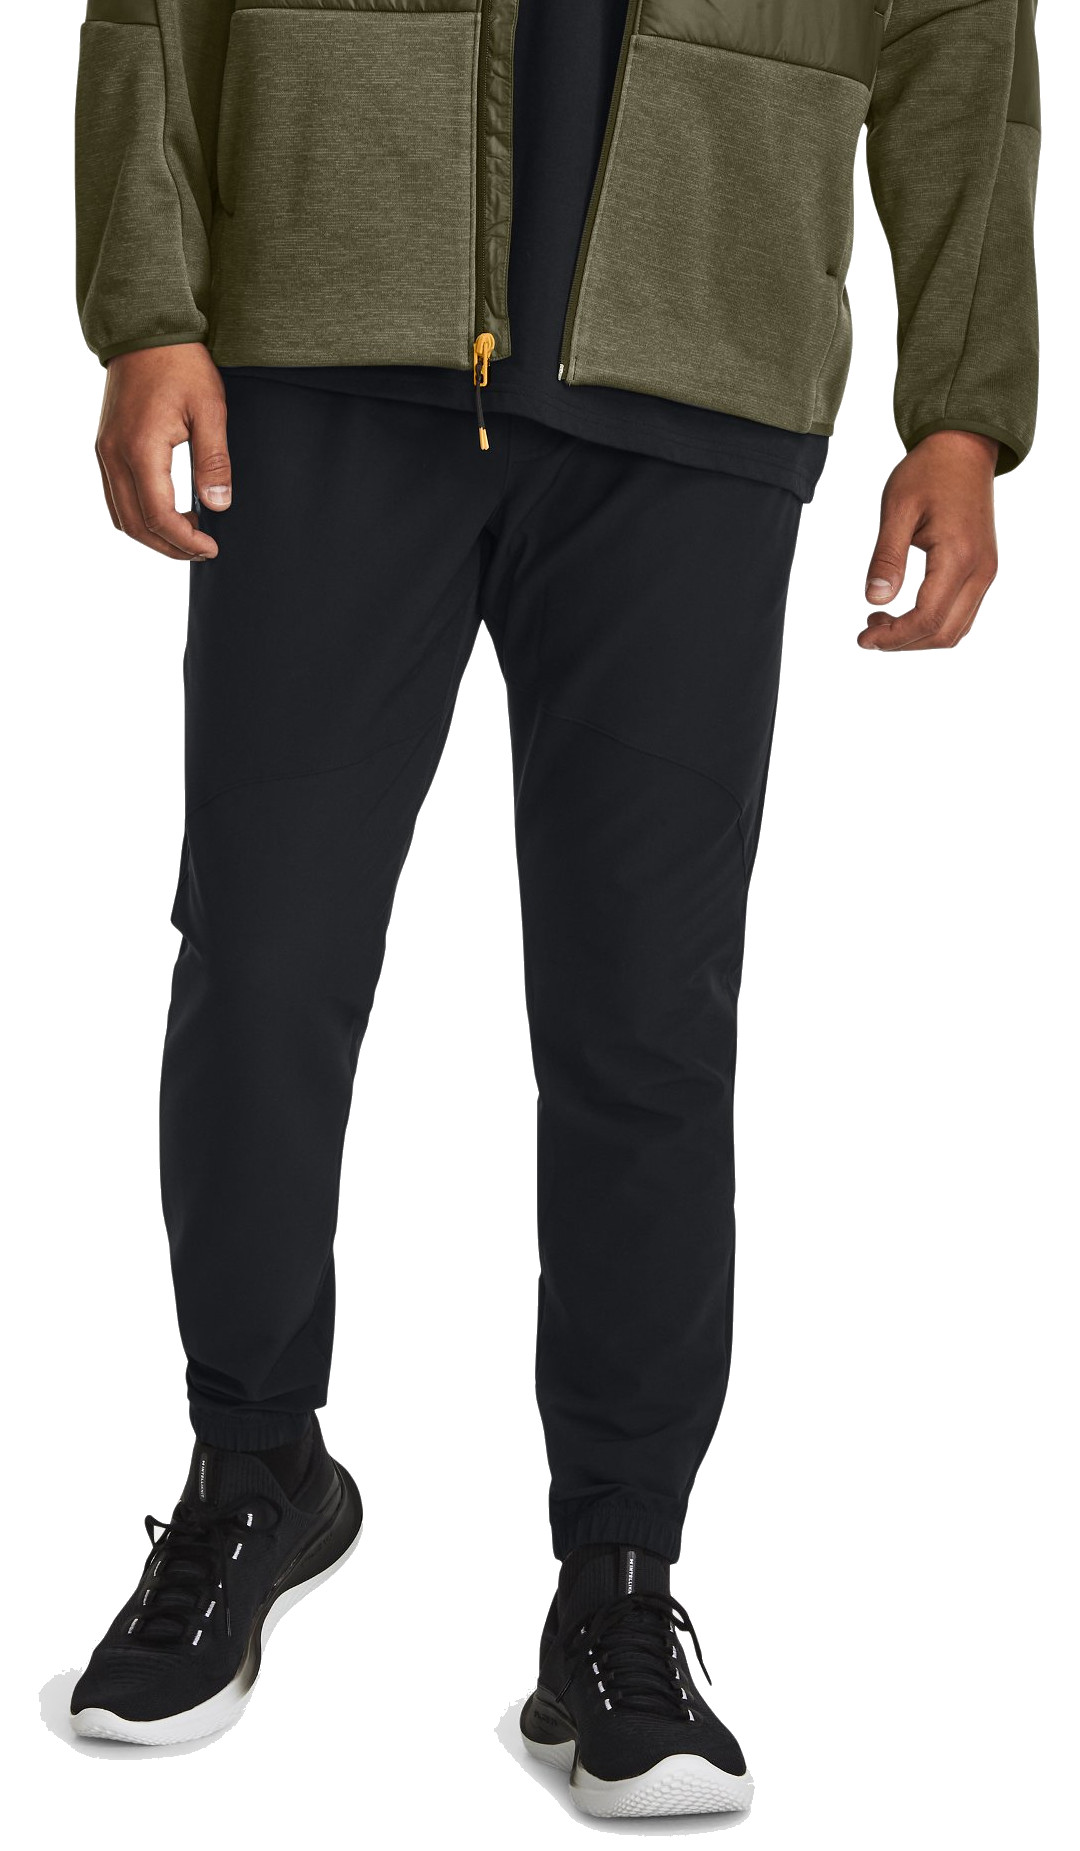 Under Armour Stretch Woven Cargo Pants